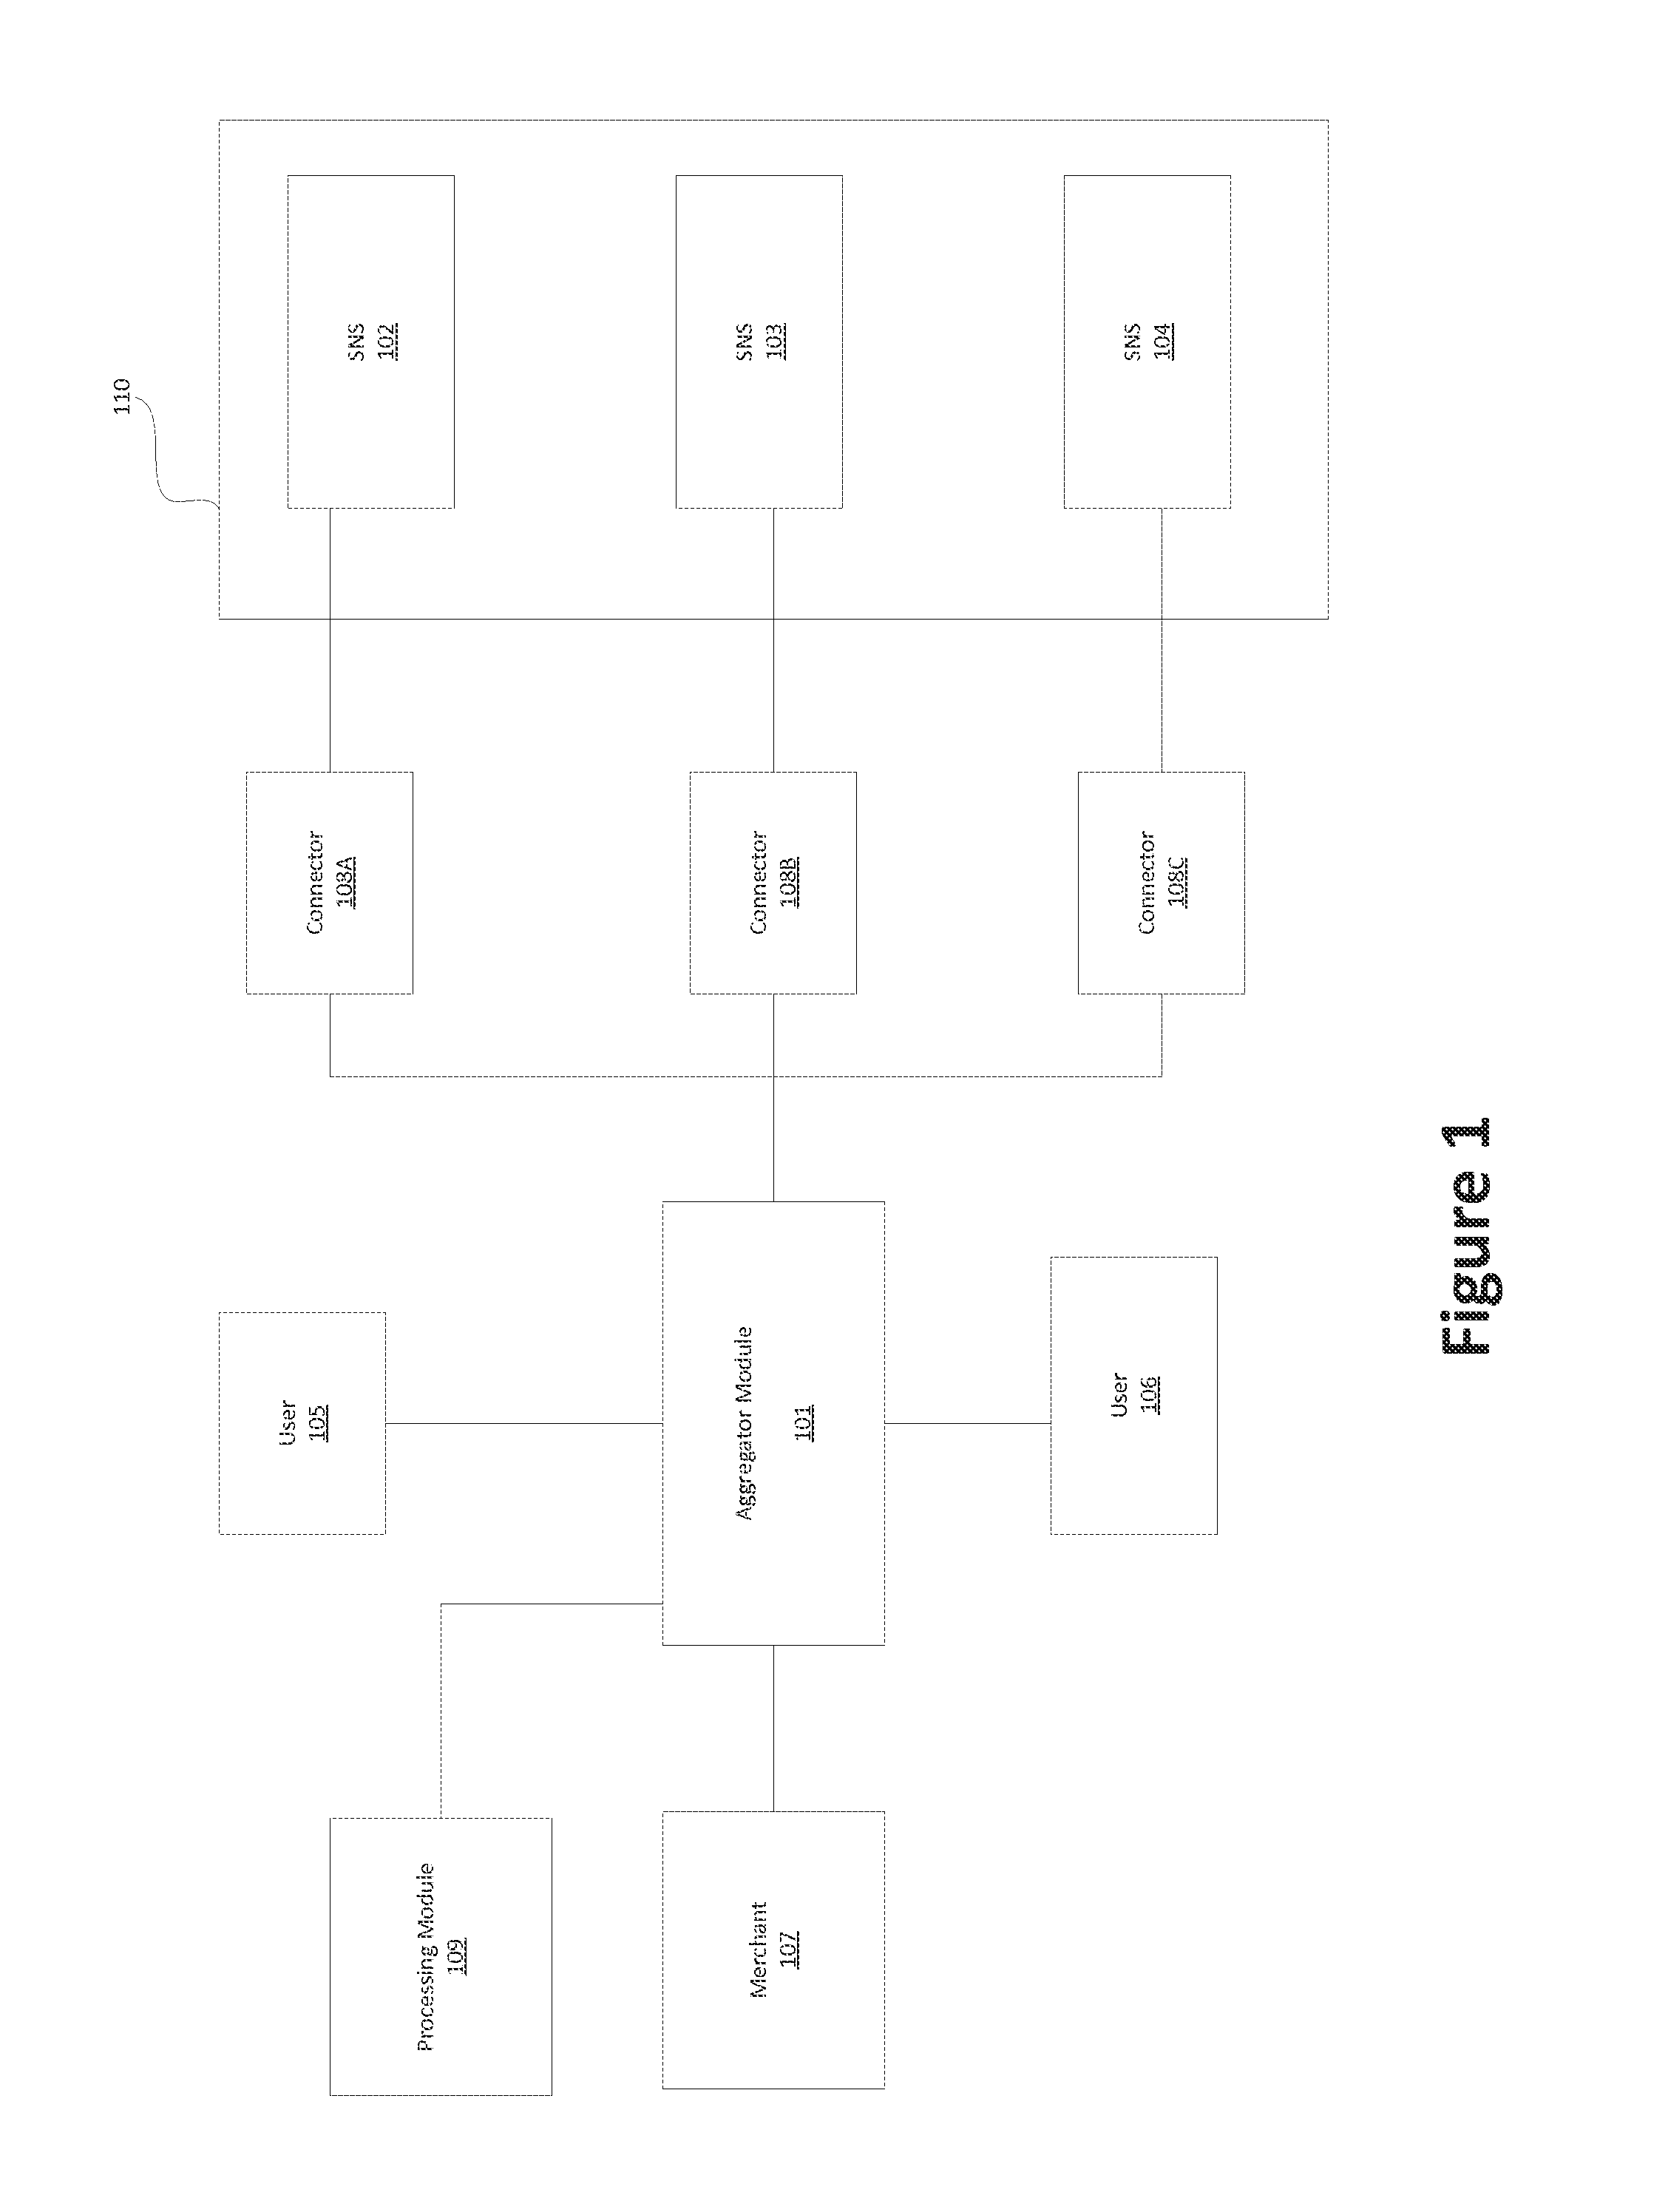 Method and system for providing recommendations using location information